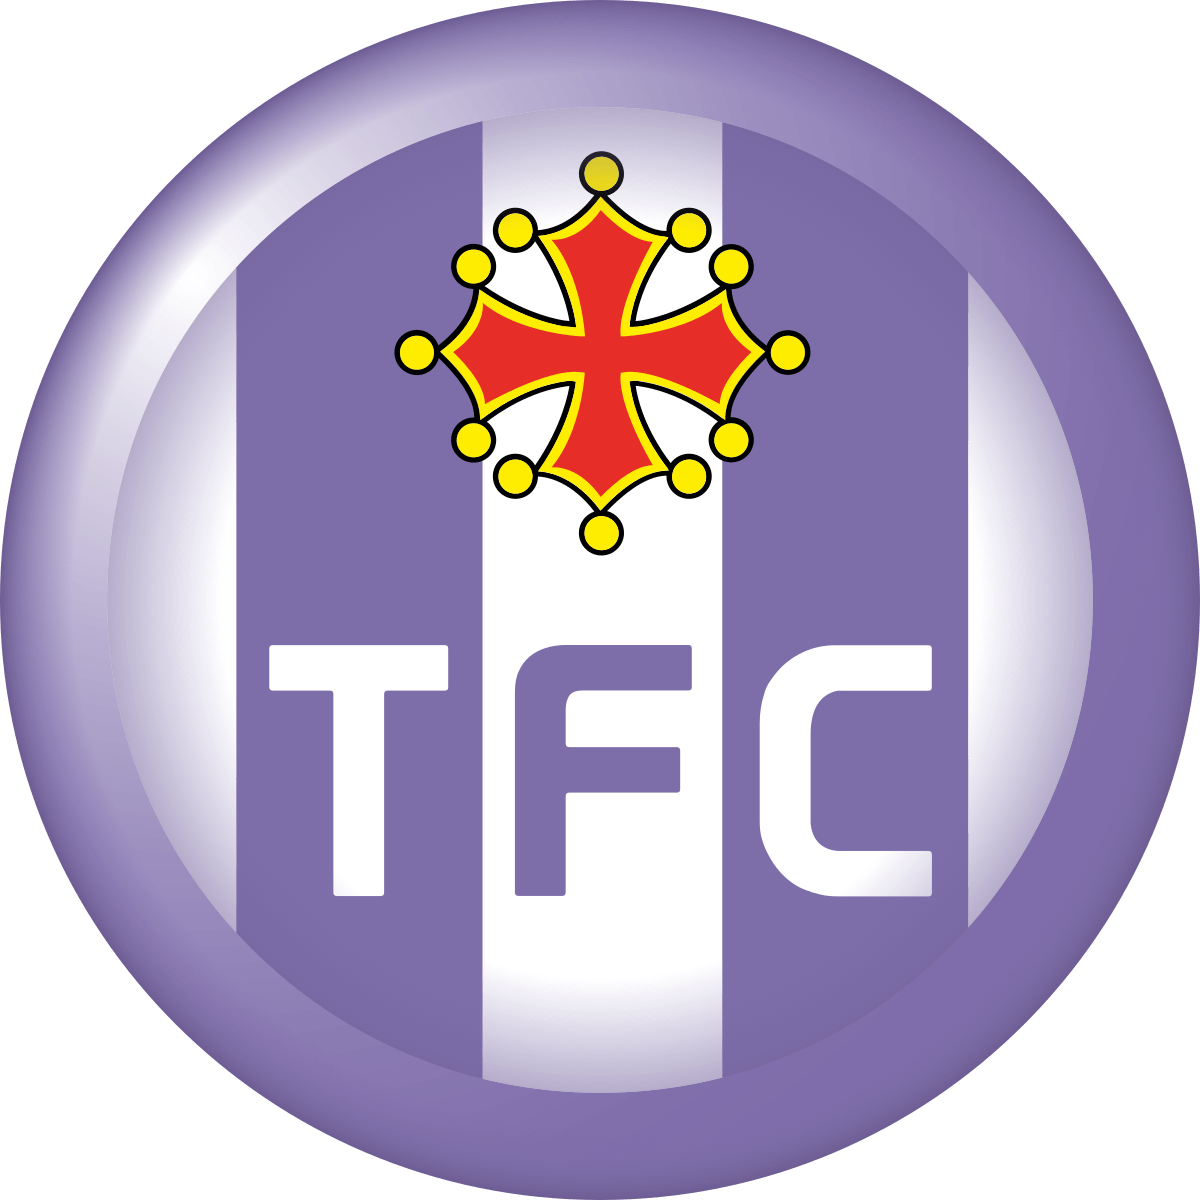 Toulouse Football Club to Purple Inside! The website